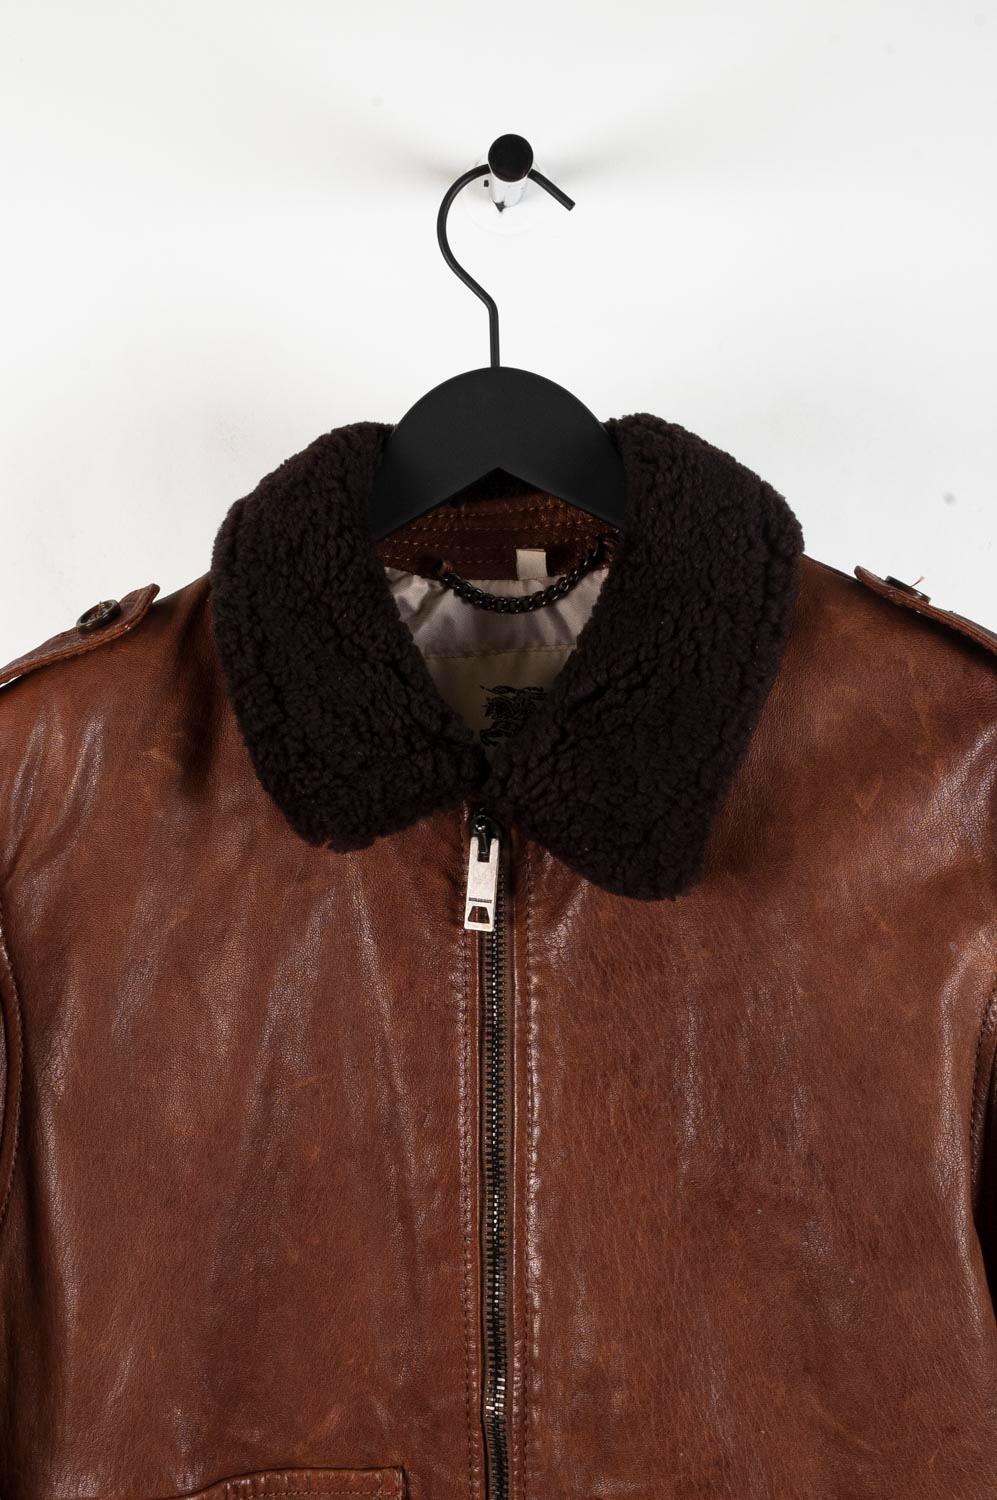 Item for sale is 100% genuine Burberry London Leather Men Jacket, S448
Color: Brown
Material: 100% lamb skin, shearling collar
Tag size: 52R (Large) 
This jacket is great quality item. Rate 8 of 10, good used condition, leather has some wear and